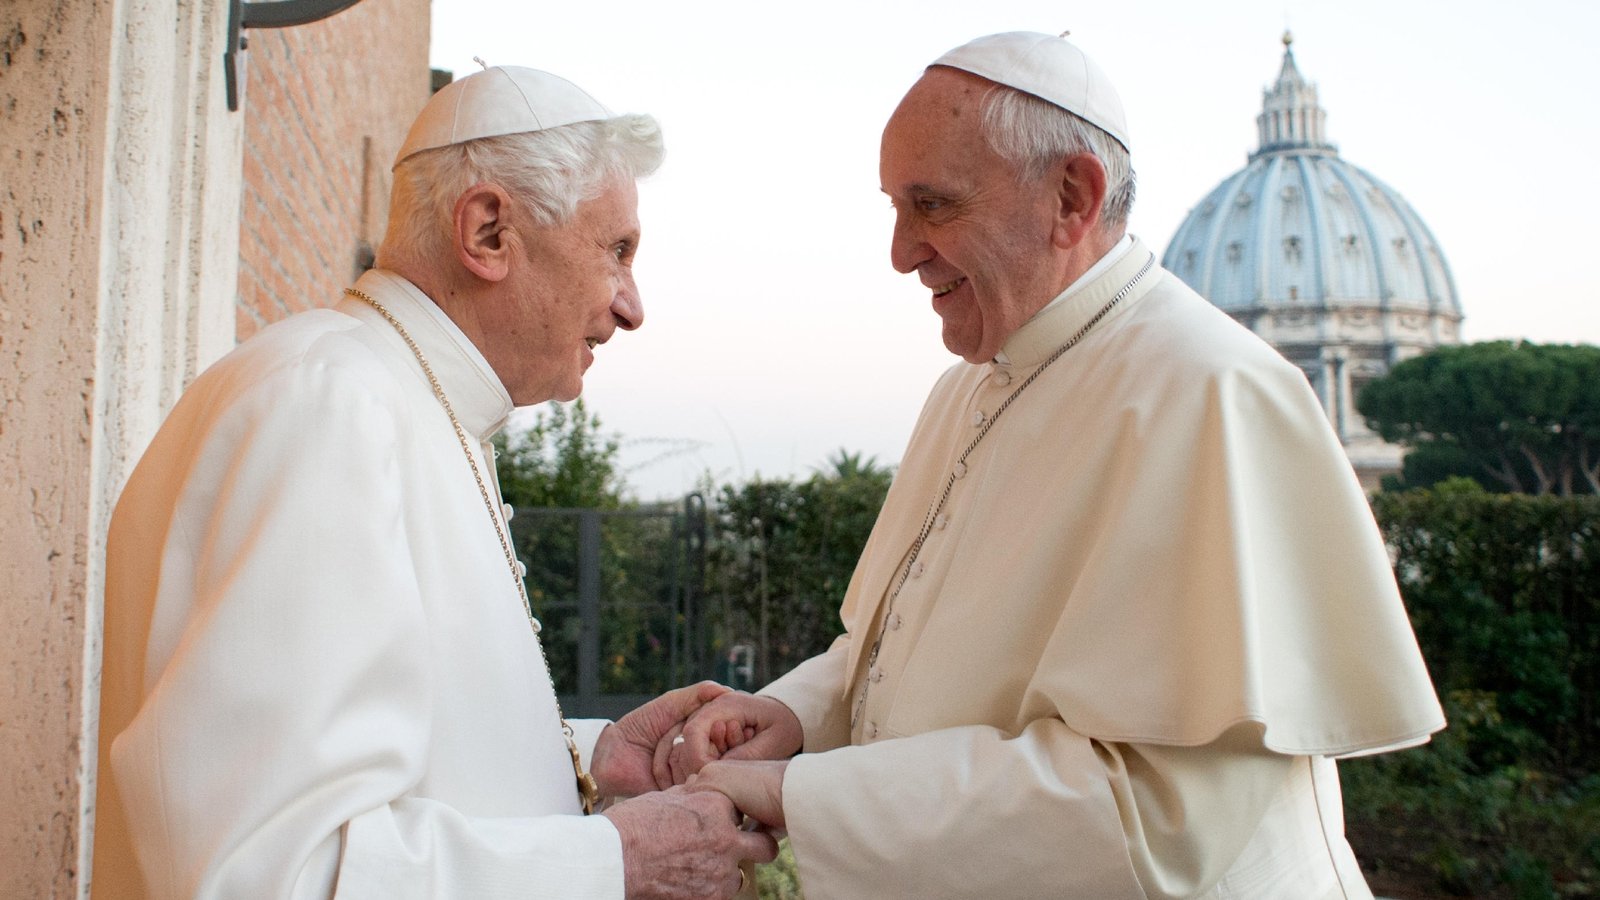 Pope Francis urges prayers for 'very sick' Benedict